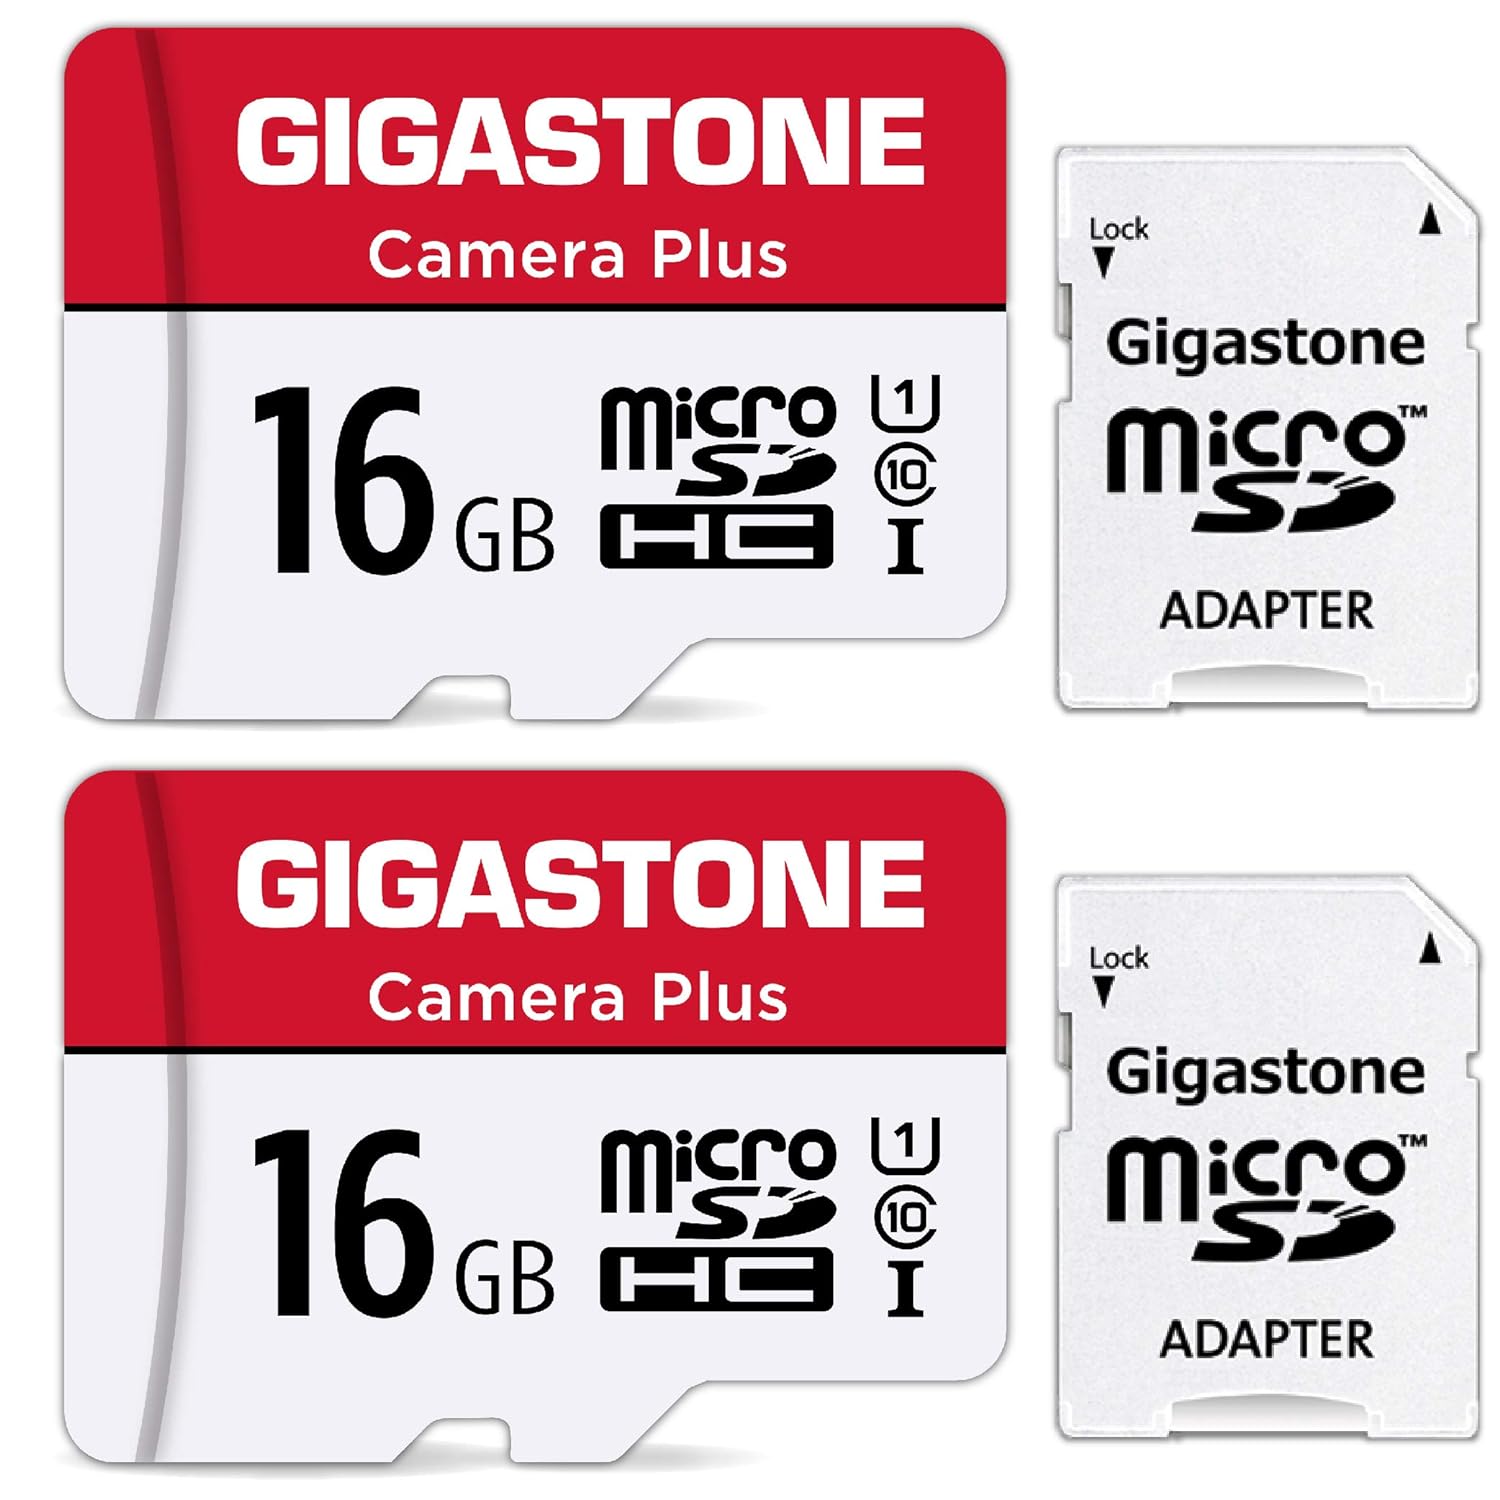 [Gigastone] 16GB 16GB Micro SD Card 2 Pack, Camera Plus, MicroSDHC Memory Card for Wyze Cam, Security Camera, Full HD Video Recording, UHS-I U1 Class 10, up to 85MB/s, with SD Adapter